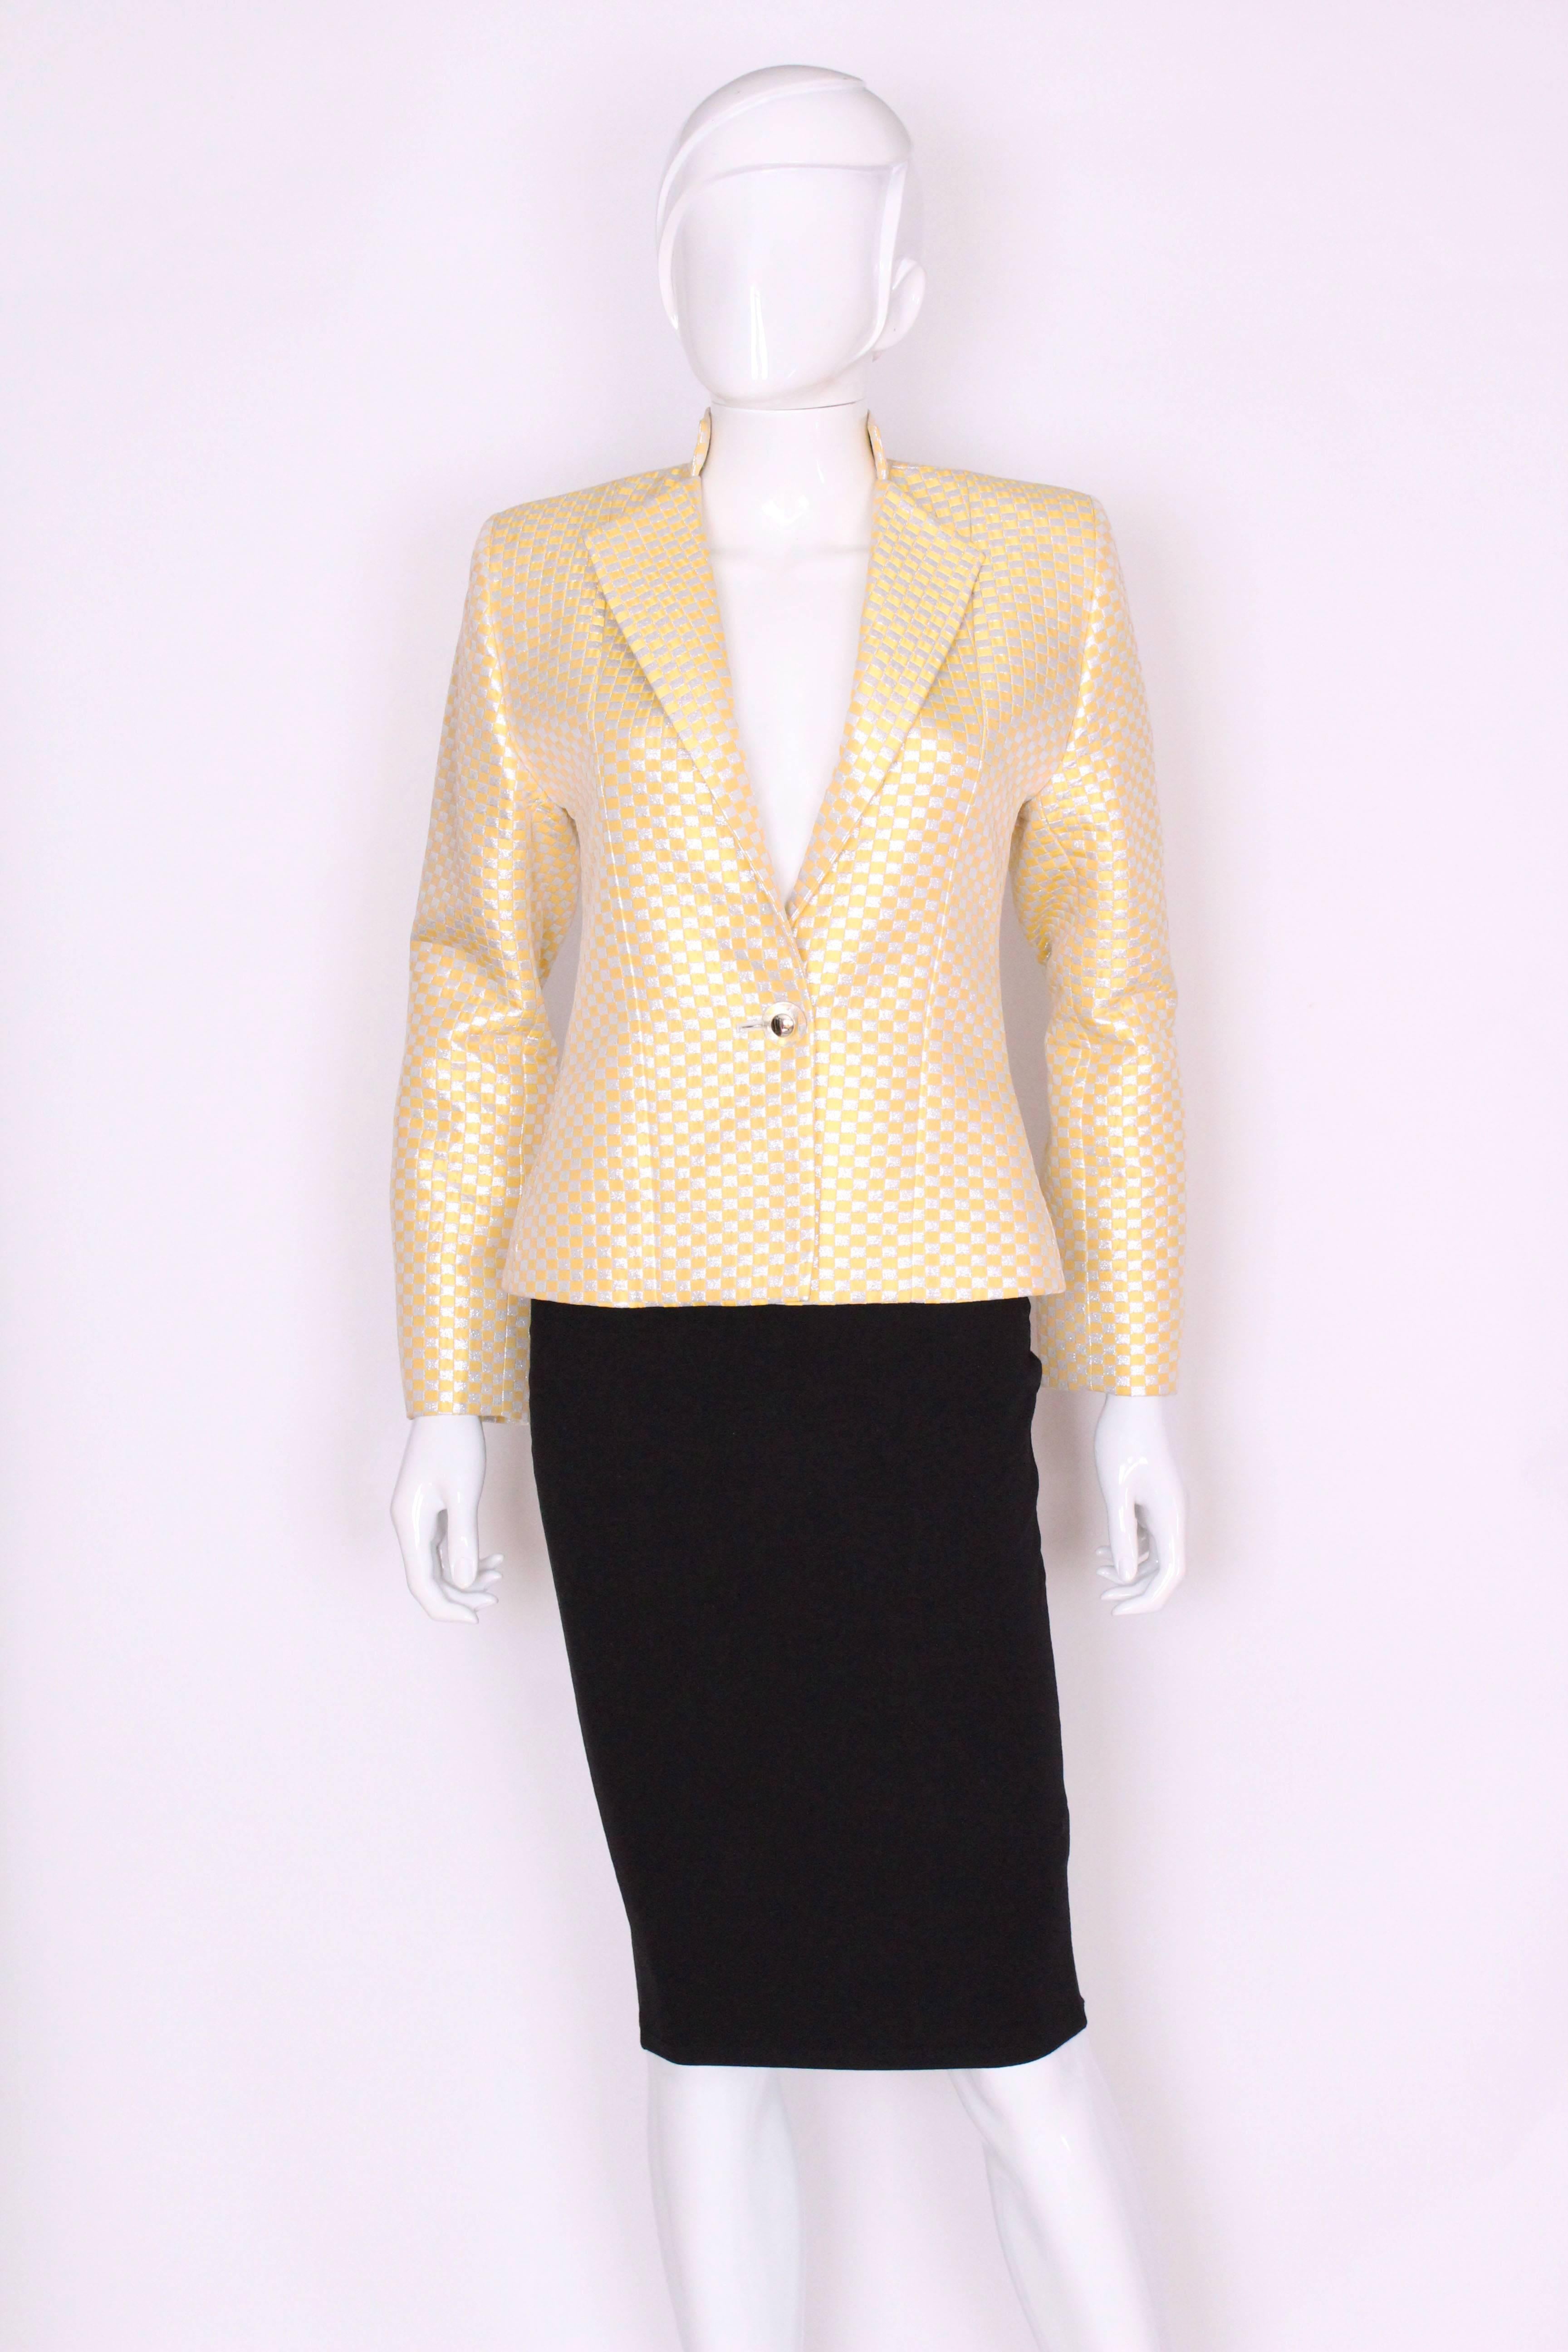 A great jacket for Fall/ Winter. This jacket is a great combination of primrose  yellow and silver.It is the variation range for YSL, but still has excellent tailoring, note the seams at the back. It has a stand up collar and lapels, with a one